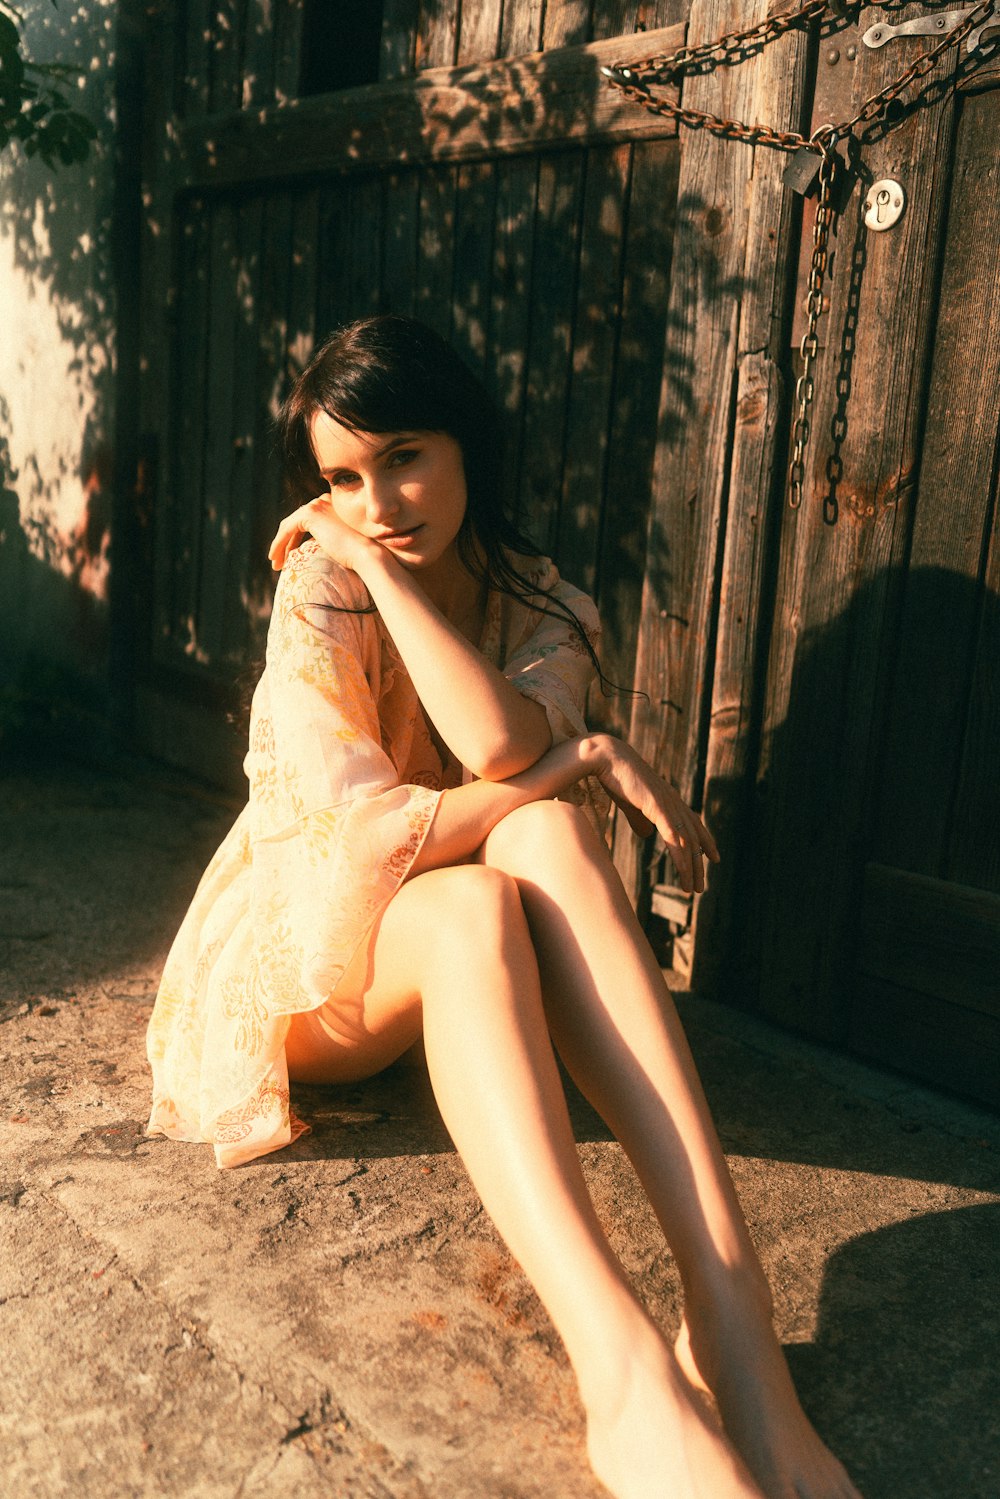 a woman in a yellow dress sitting on the ground